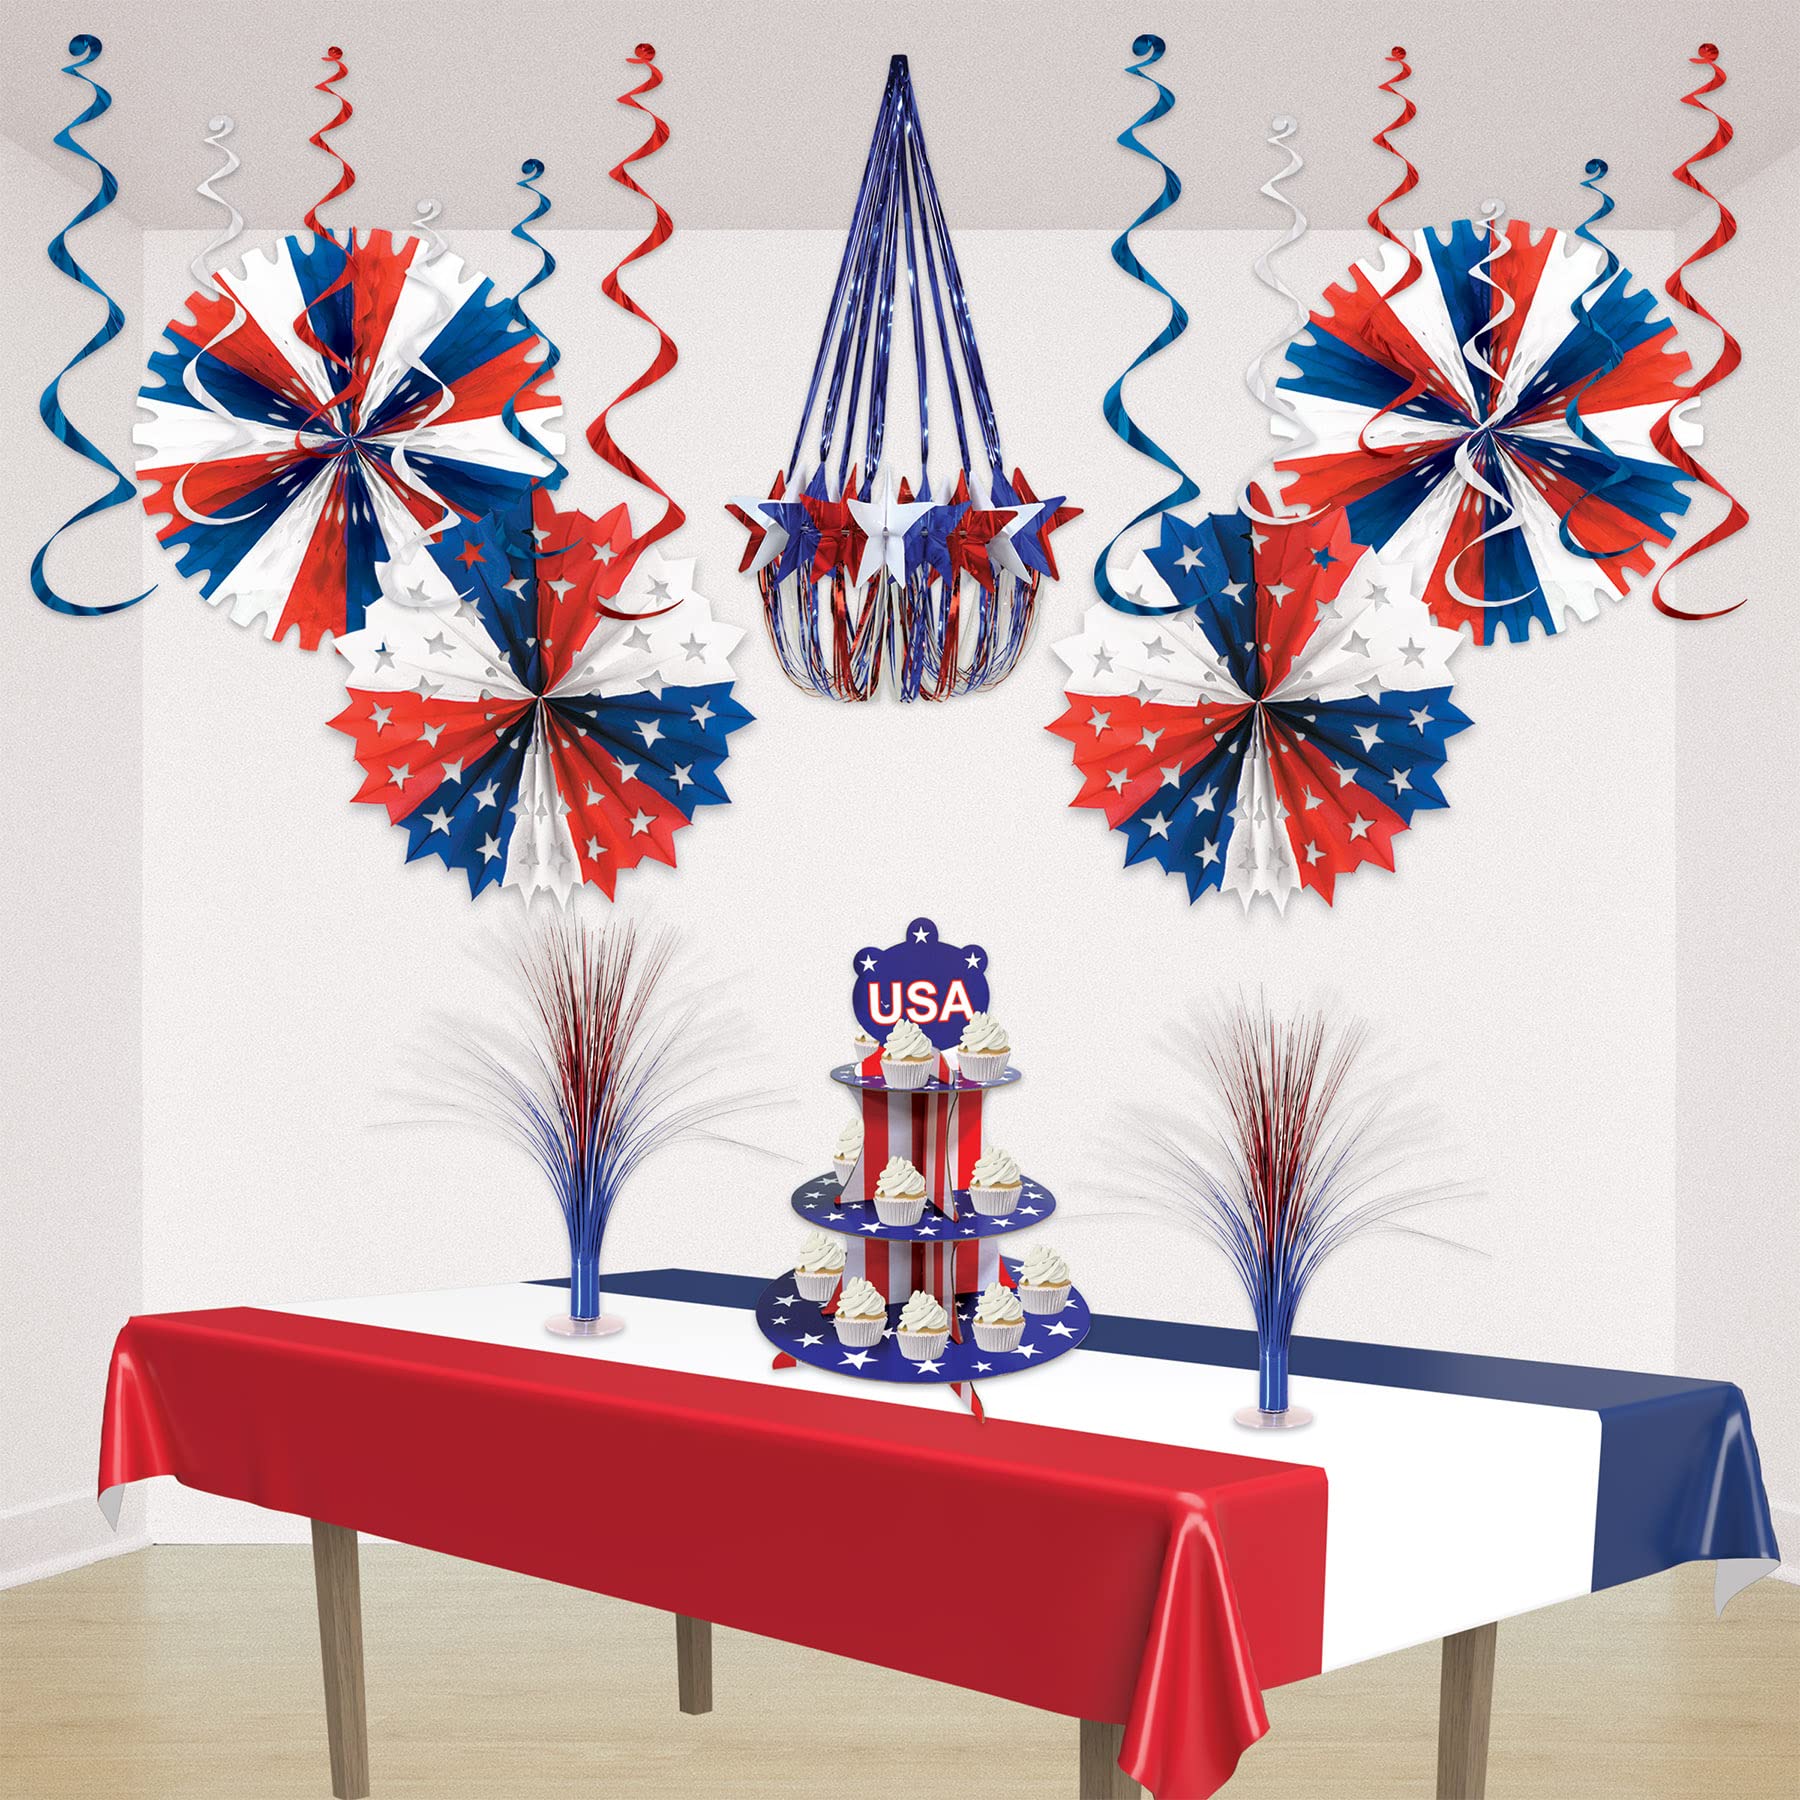 Beistle Red, White And Blue Patriotic Party Tablecover Plastic Table Cloth, Rectangular, 4th of July, Memorial Day Decorations, Disposable Tablecloth, 54